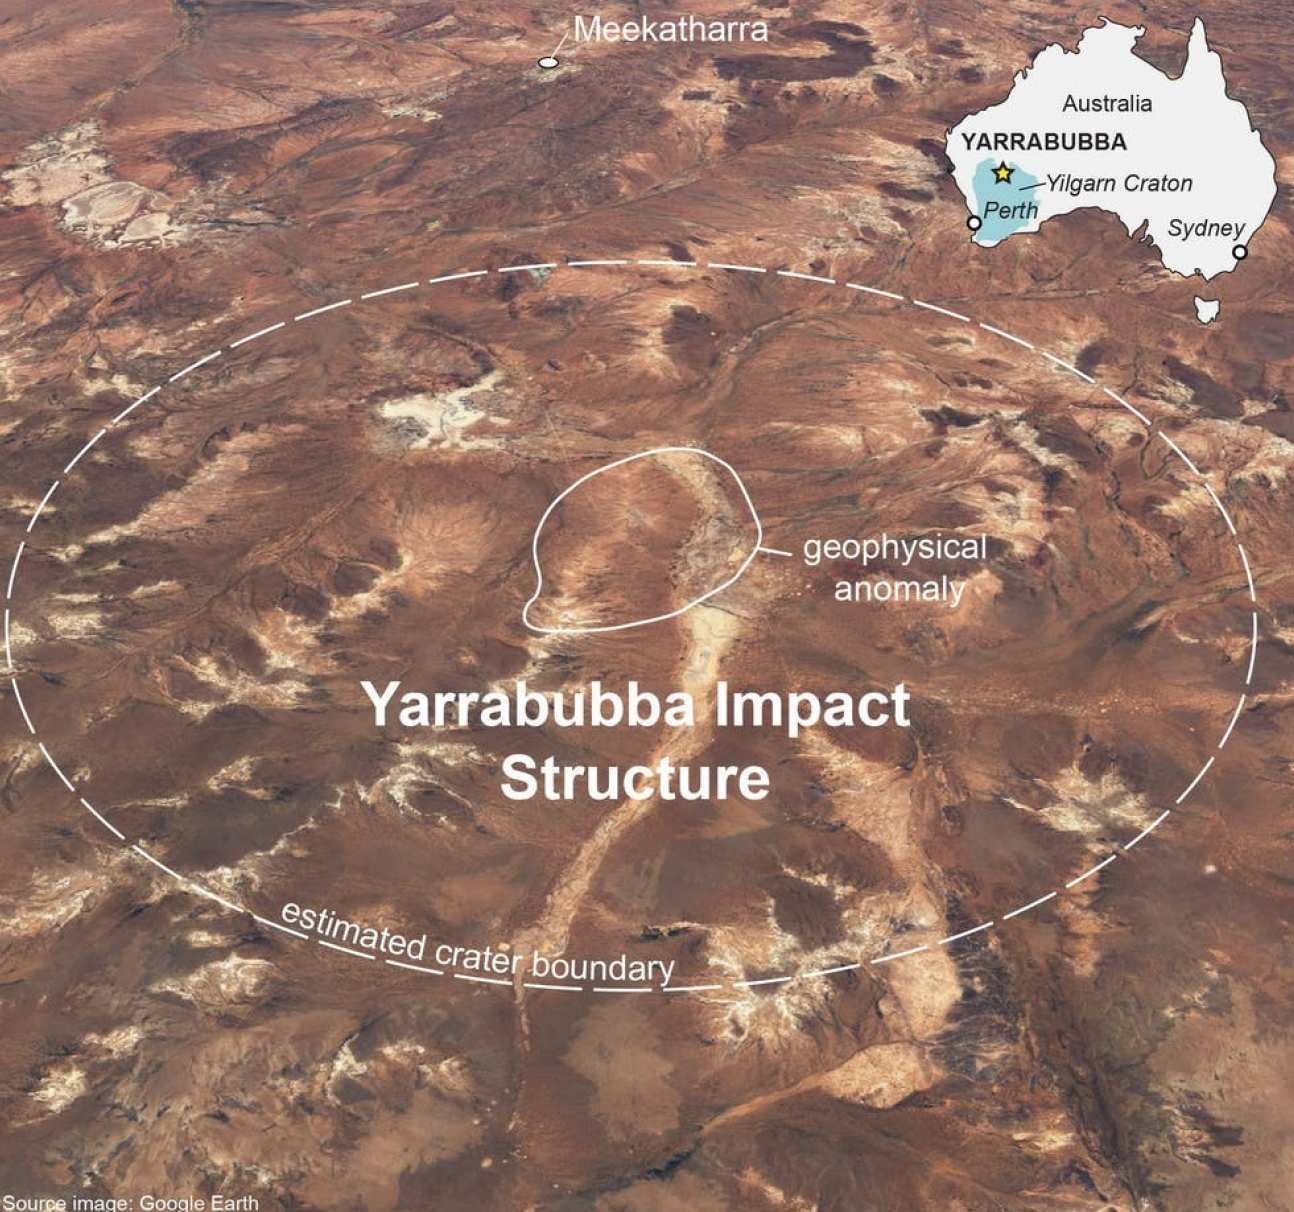 Photo of the Yarrabubba impact structure from above, and its place in Australia